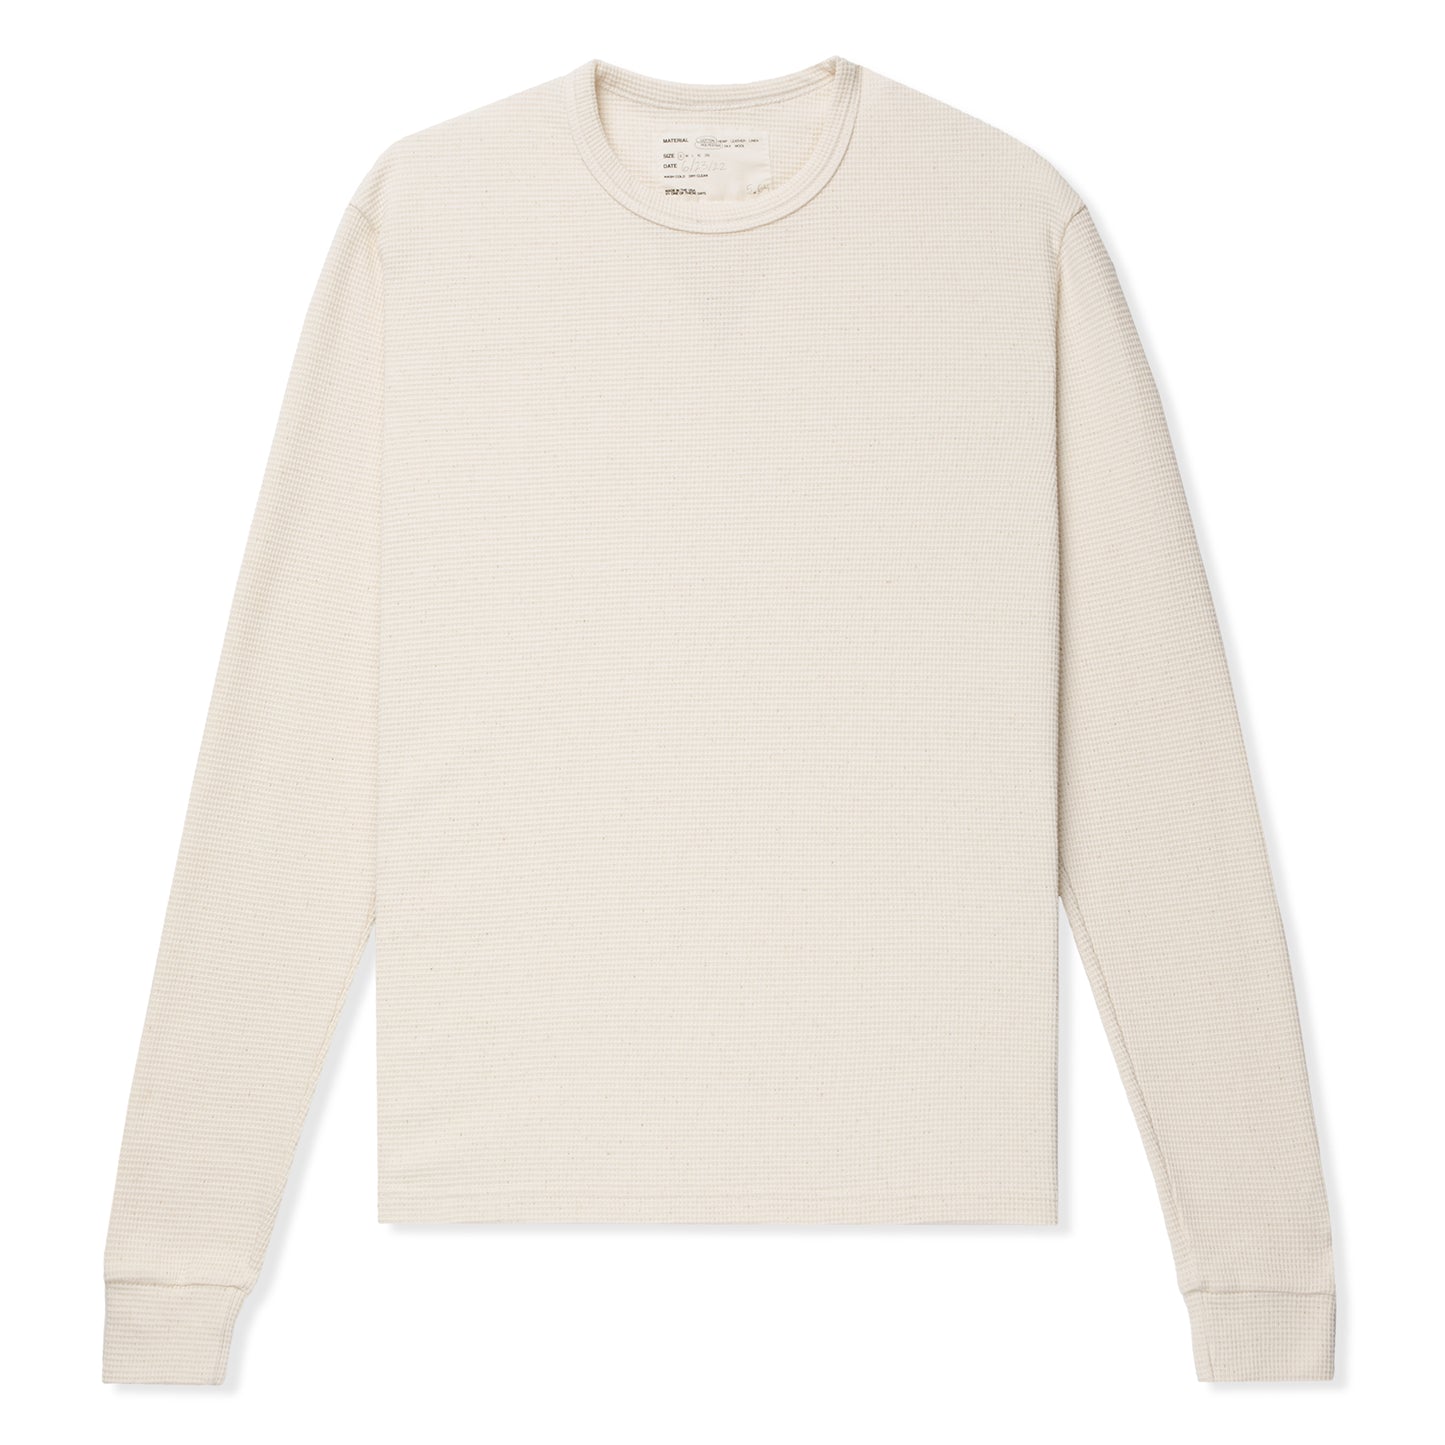 ONE OF THESE DAYS Long Sleeve Thermal (Bone)